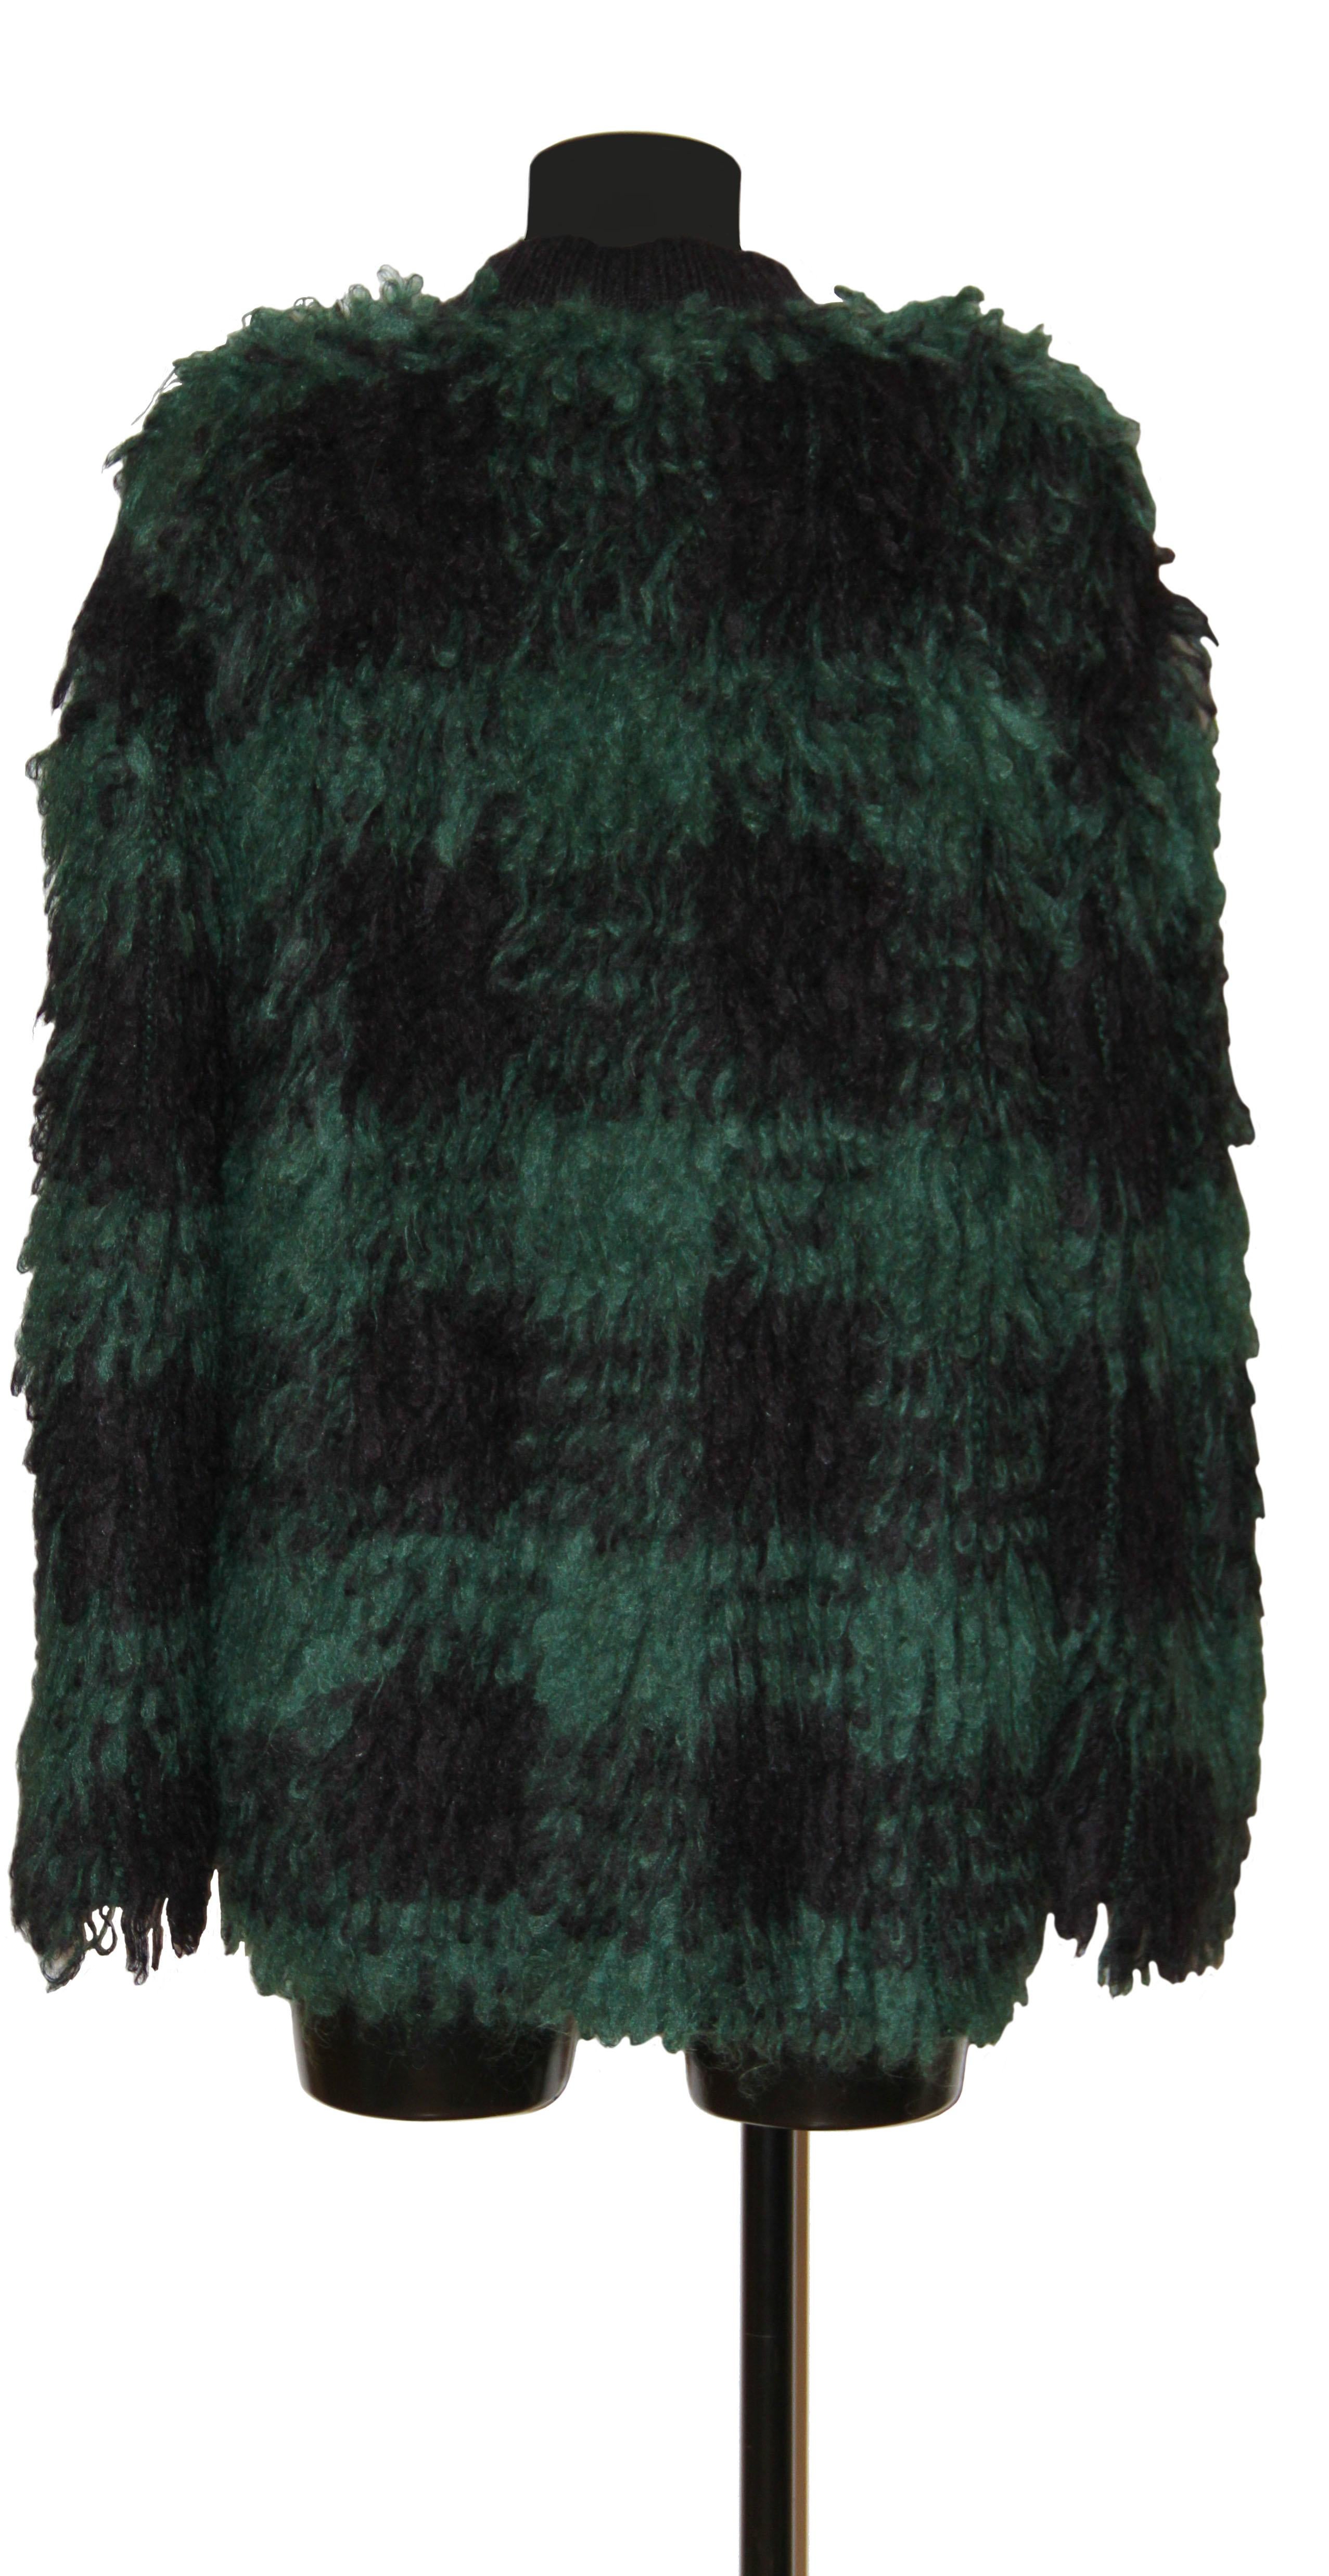 This pre-owned mohair fringed jacket is part of the Fall-Winter Ready to Wear 2019 Christian Dior Collection.

Collection: Fall-Winter Ready to Wear 2019
Fabric: 60% mohair, 34% polyamide, 6% wool
Color: black, green
Size: FR 38
Measurements: Front: